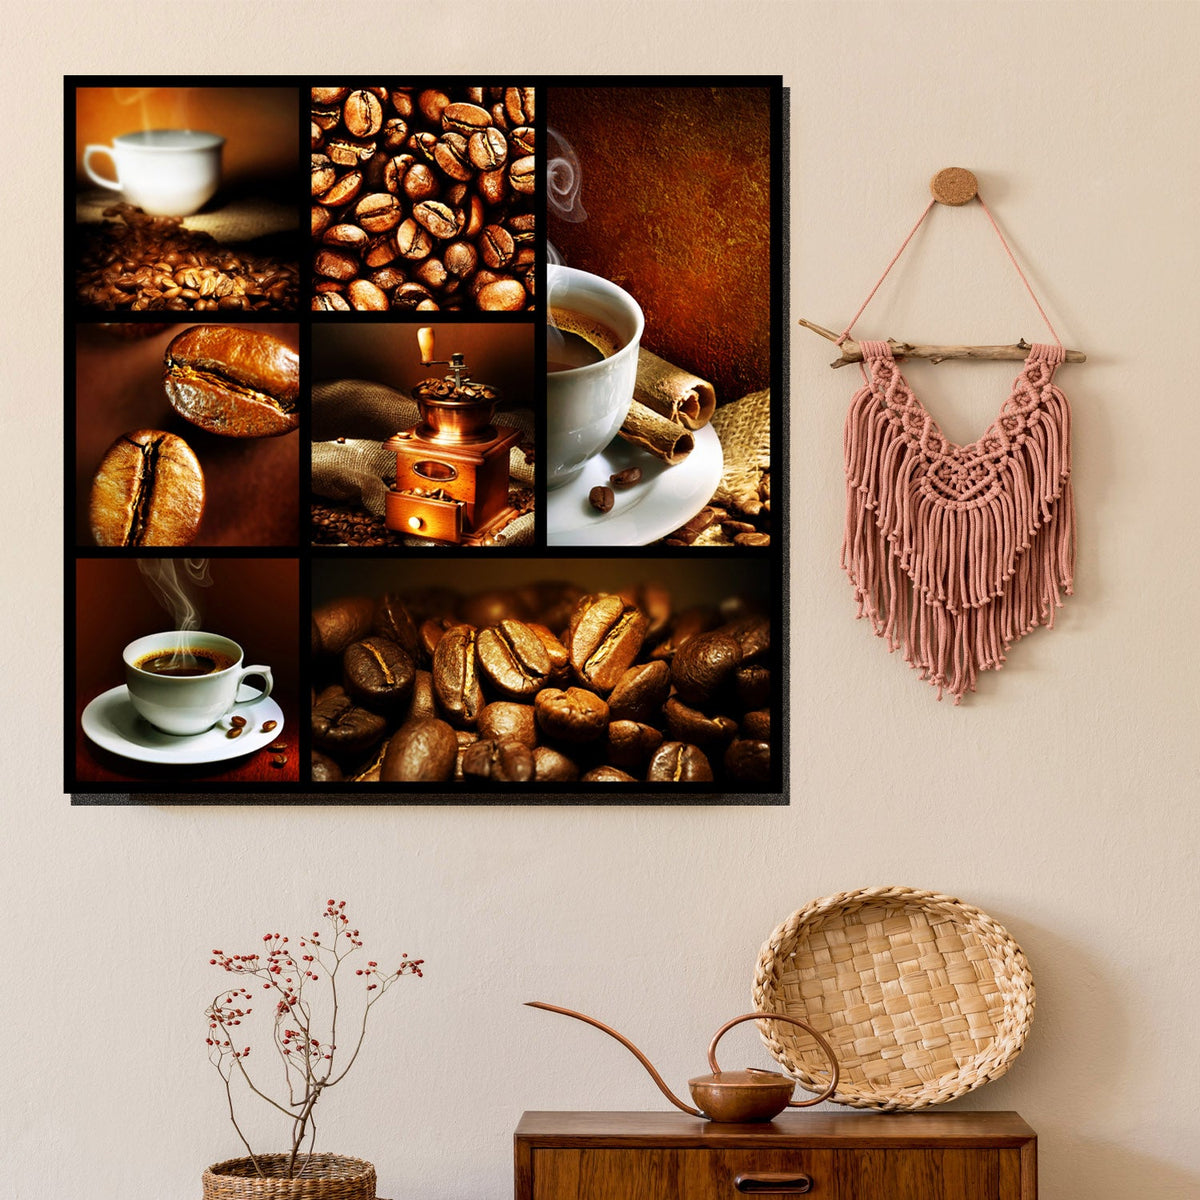 https://cdn.shopify.com/s/files/1/0387/9986/8044/products/CoffeeCollageCanvasArtprintStretched-2.jpg